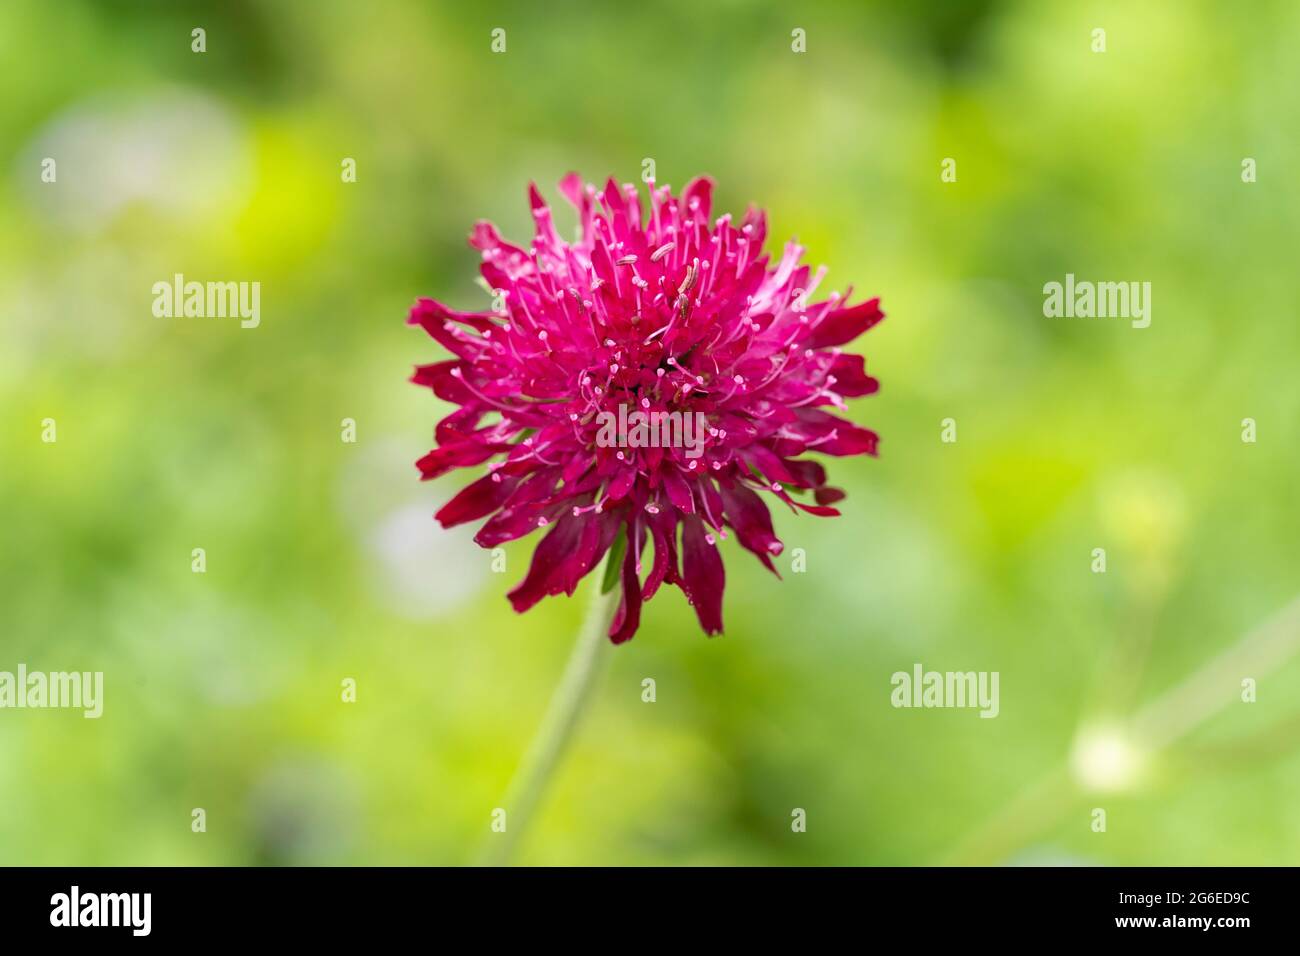 Macro closeup of a magenta coloured Knautia macedonica Griseb. flower - Macedonian Scabious - flowering in July in a garden in Worcestershire, England Stock Photo